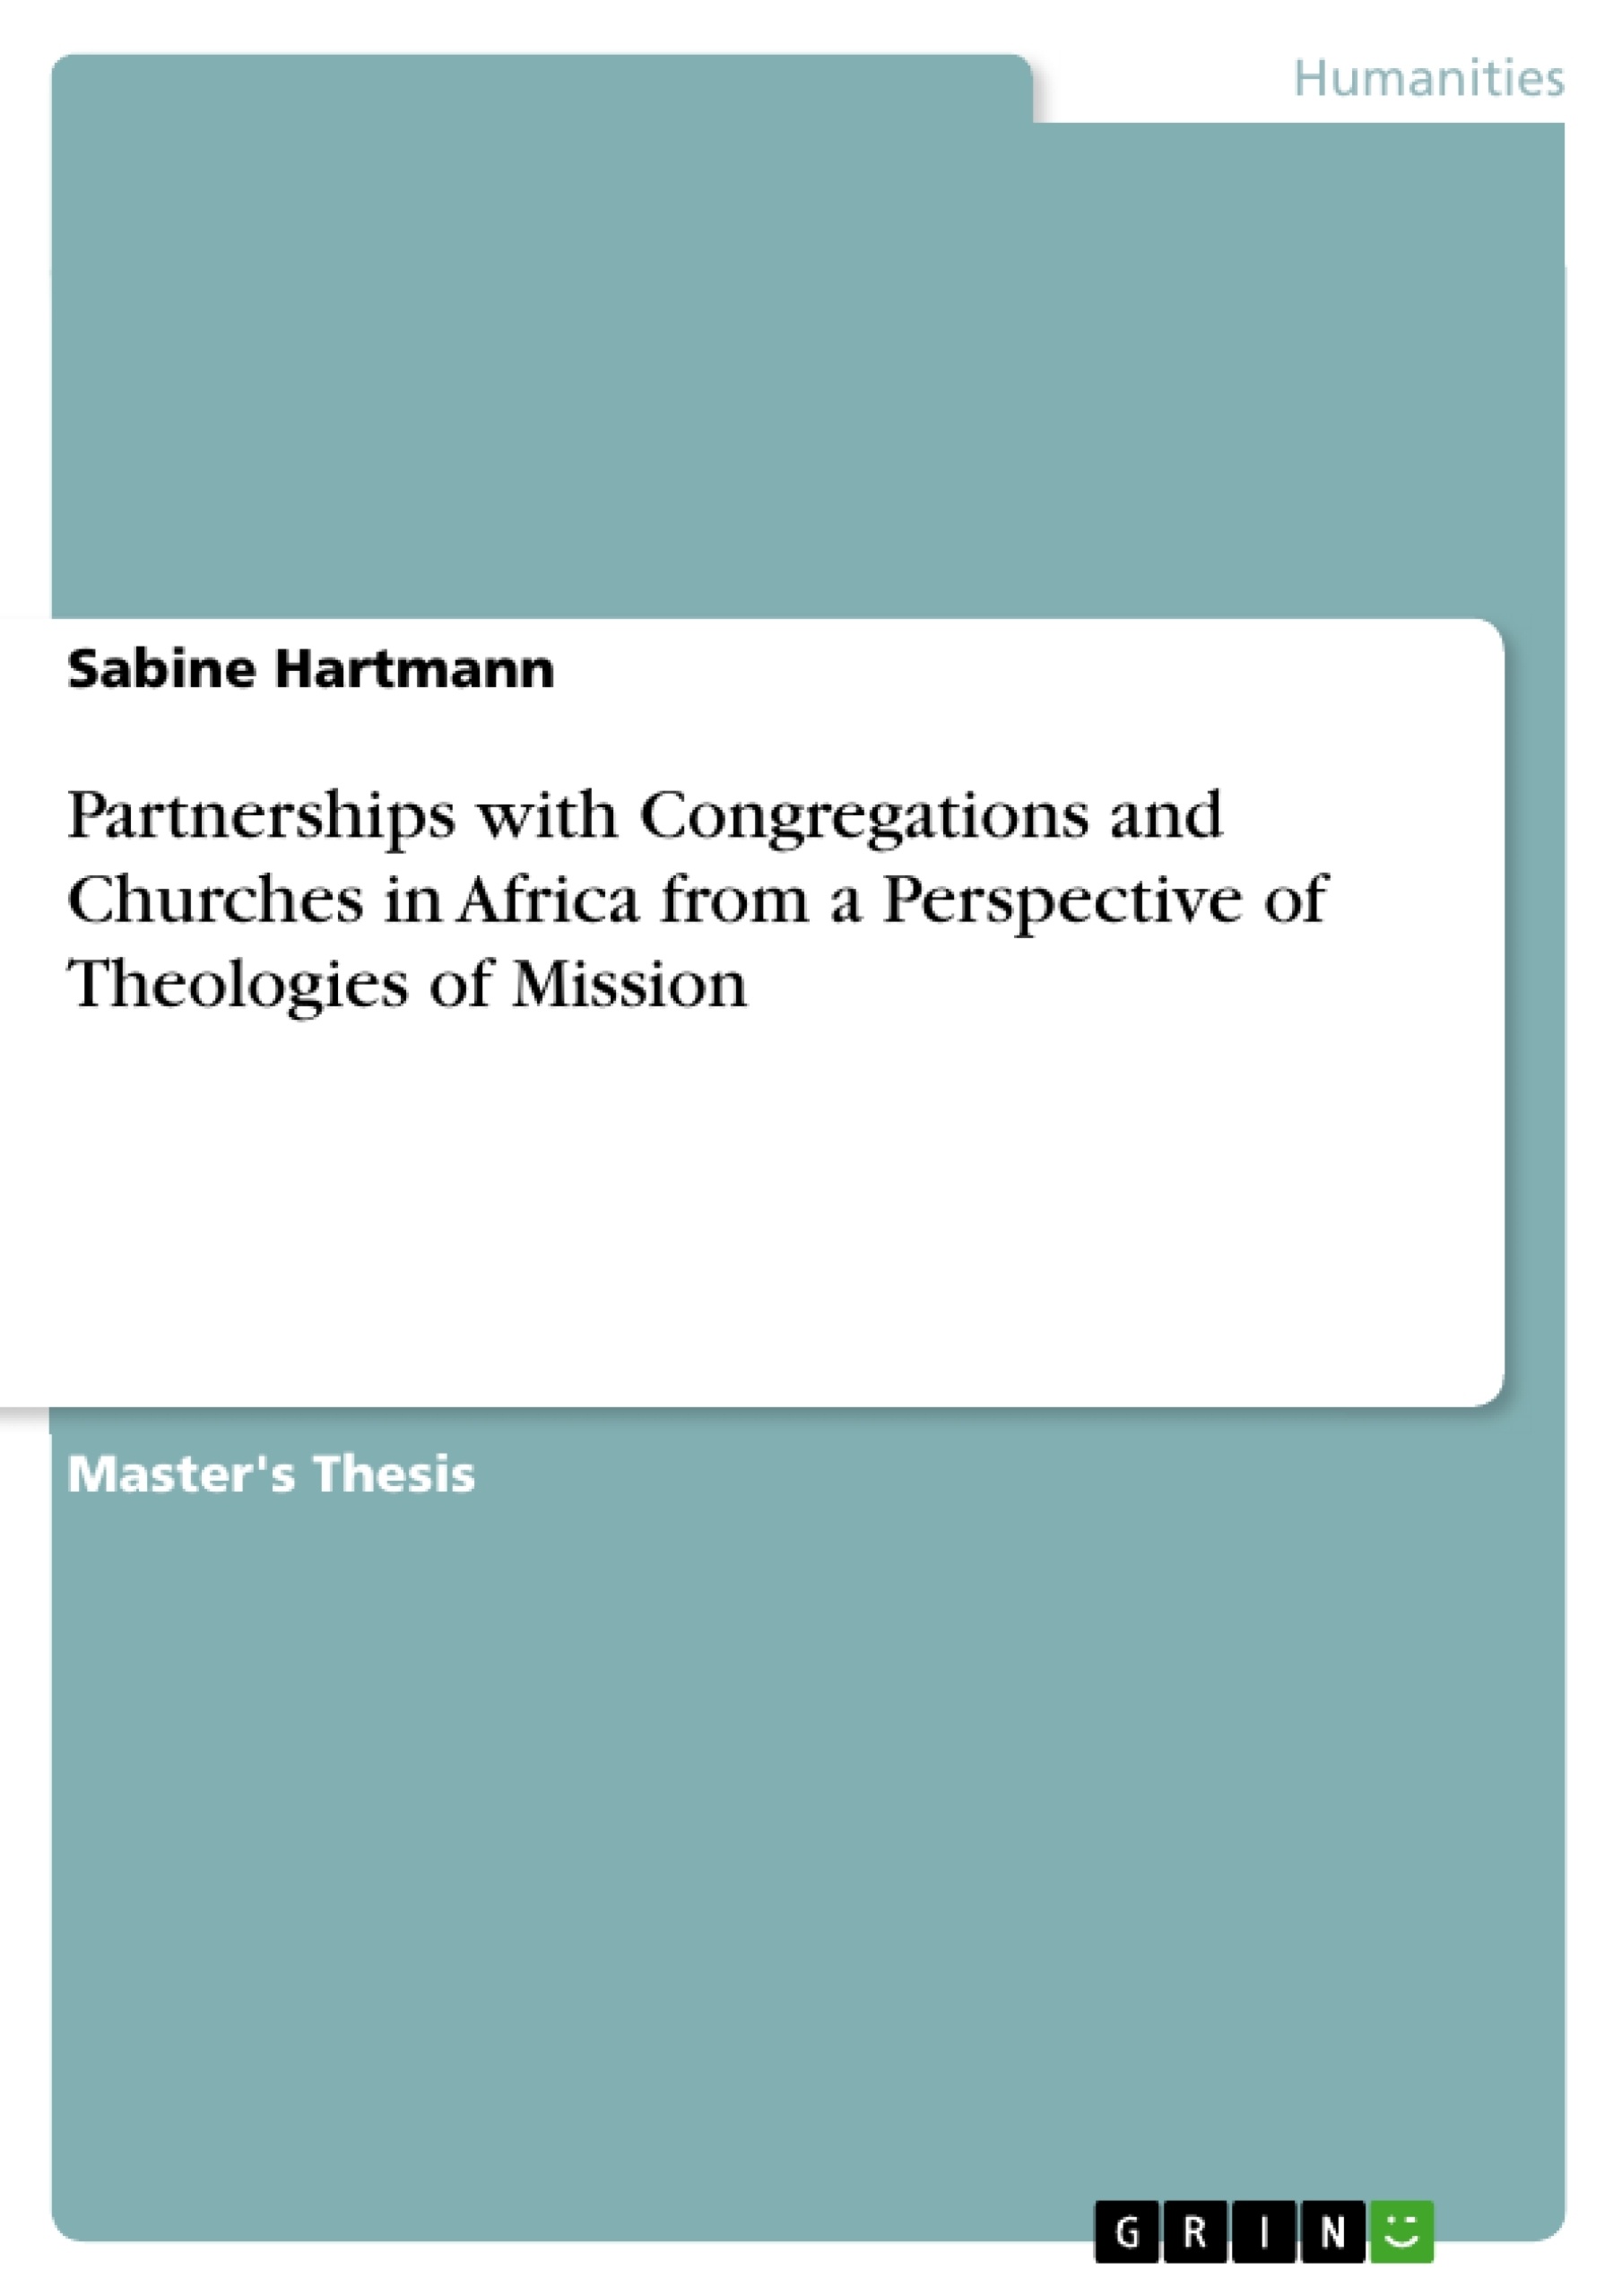 Title: Partnerships with Congregations and Churches in Africa from a Perspective of Theologies of Mission